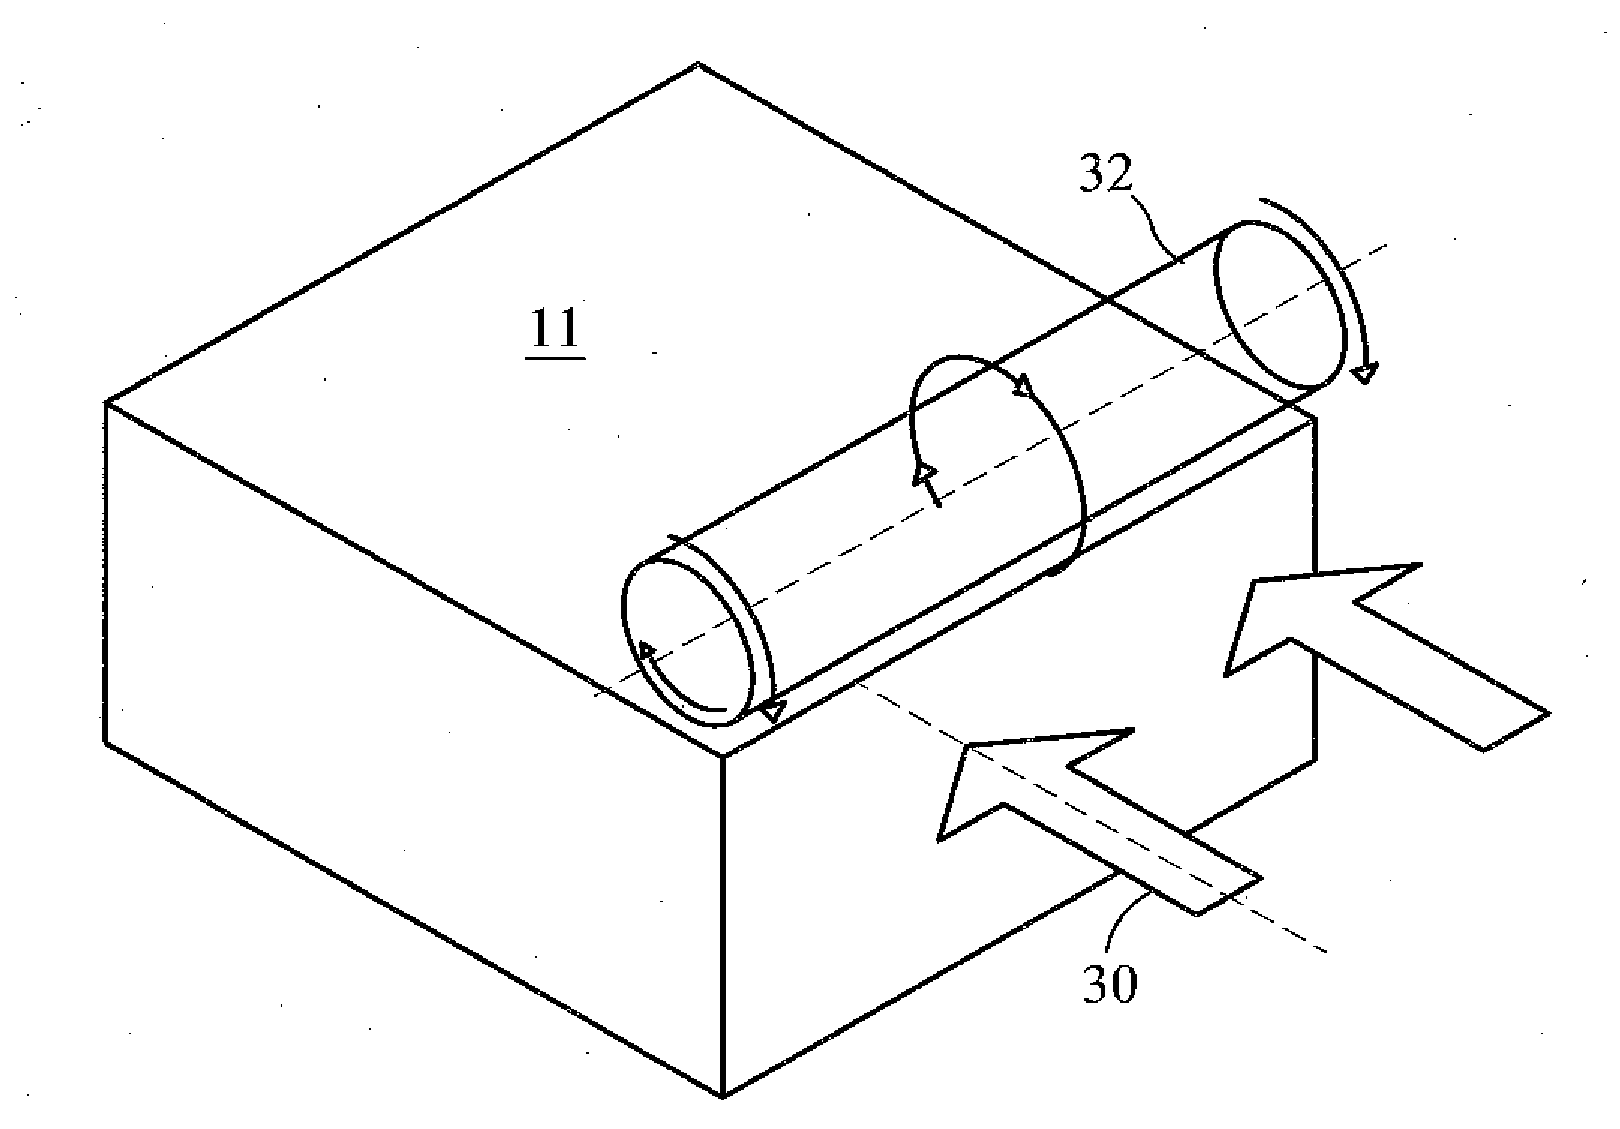 Wind mitigation and wind power device